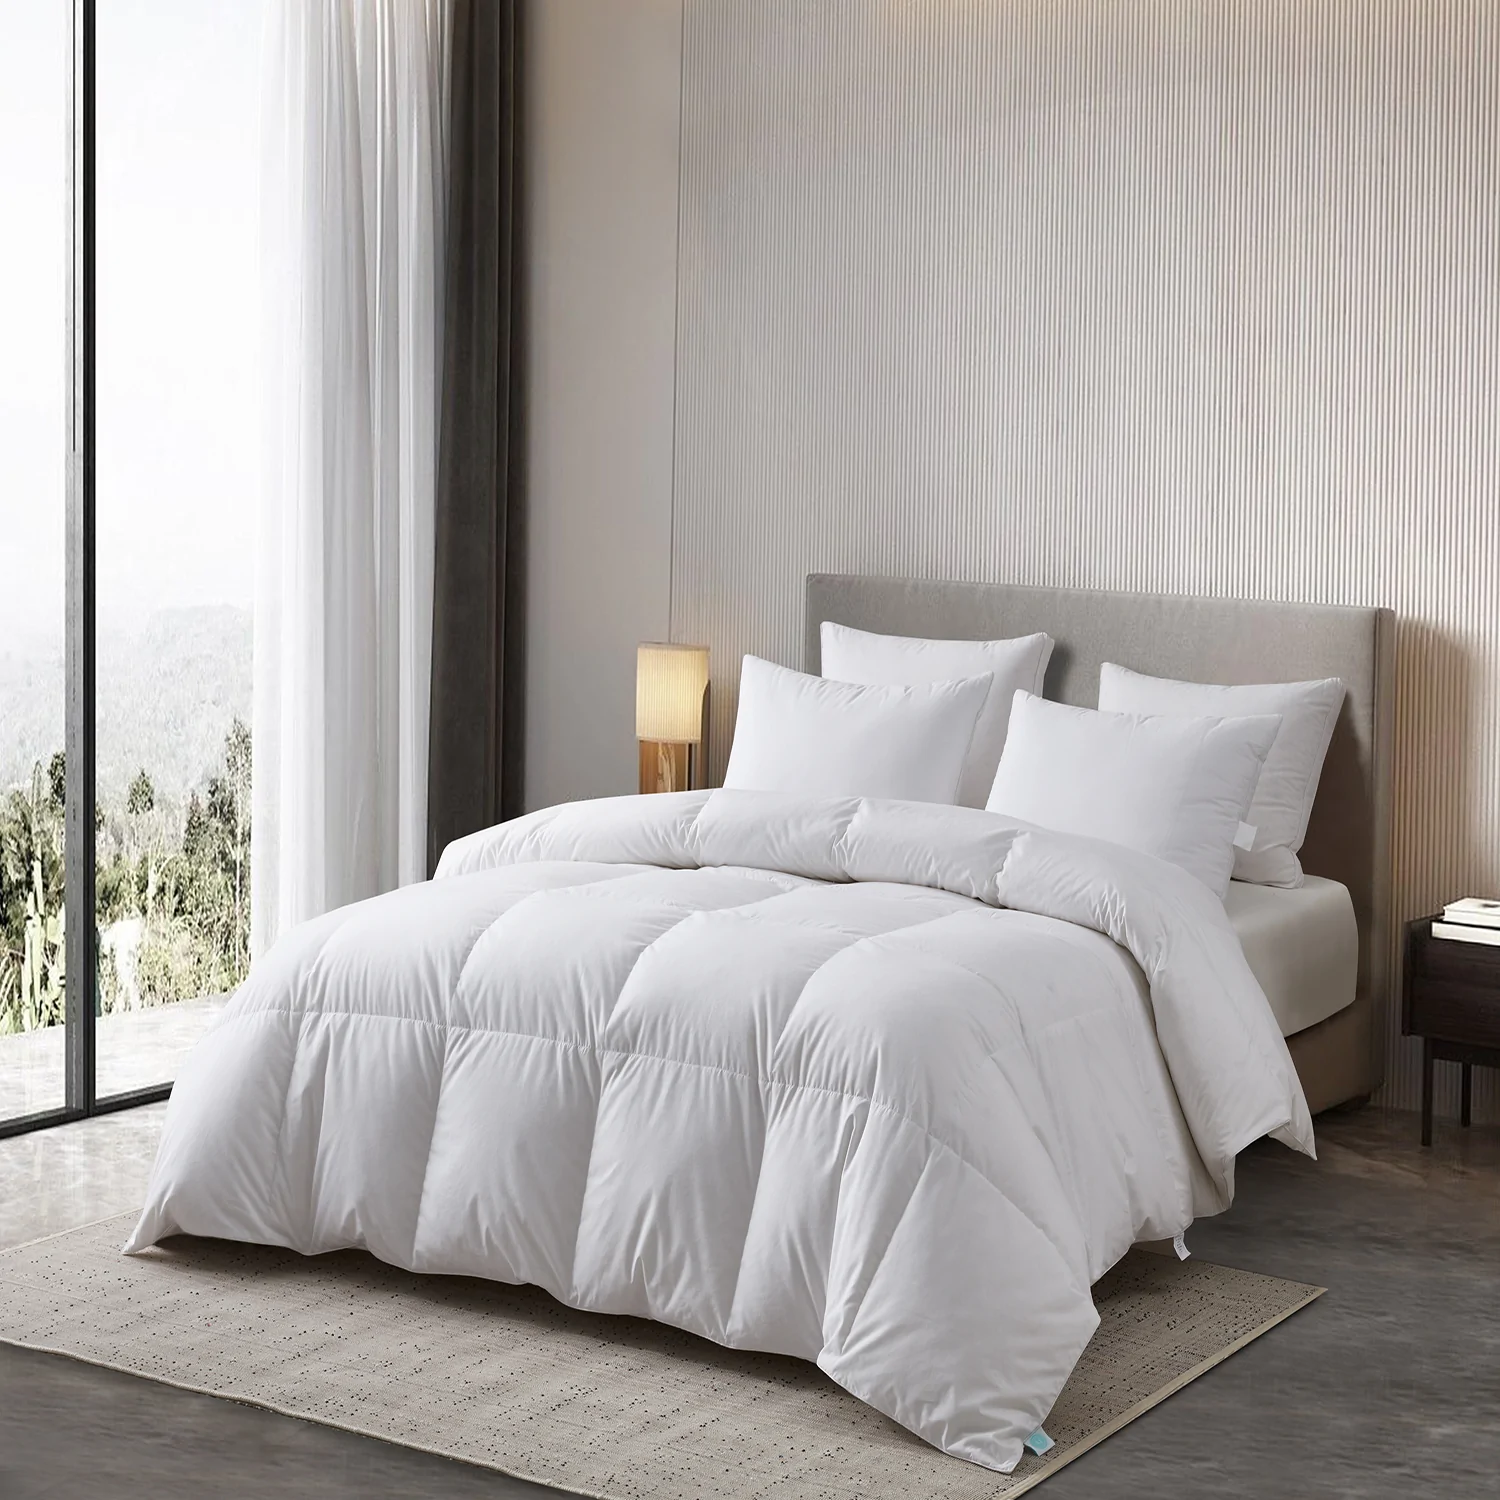 A Touch of Luxury: Upgrading Your Bedding with a Feather and Down Doona